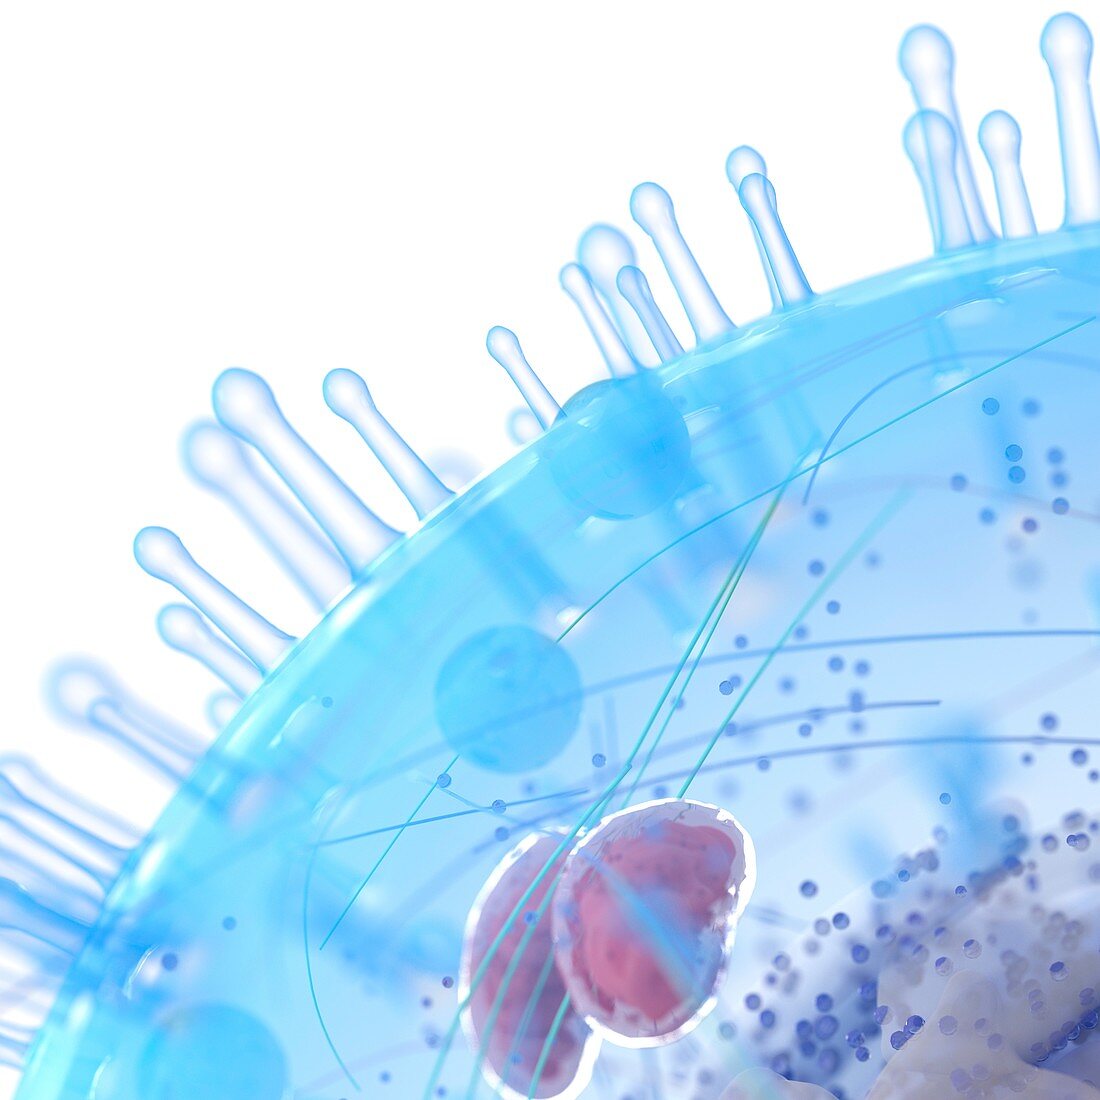 Illustration of a human cell